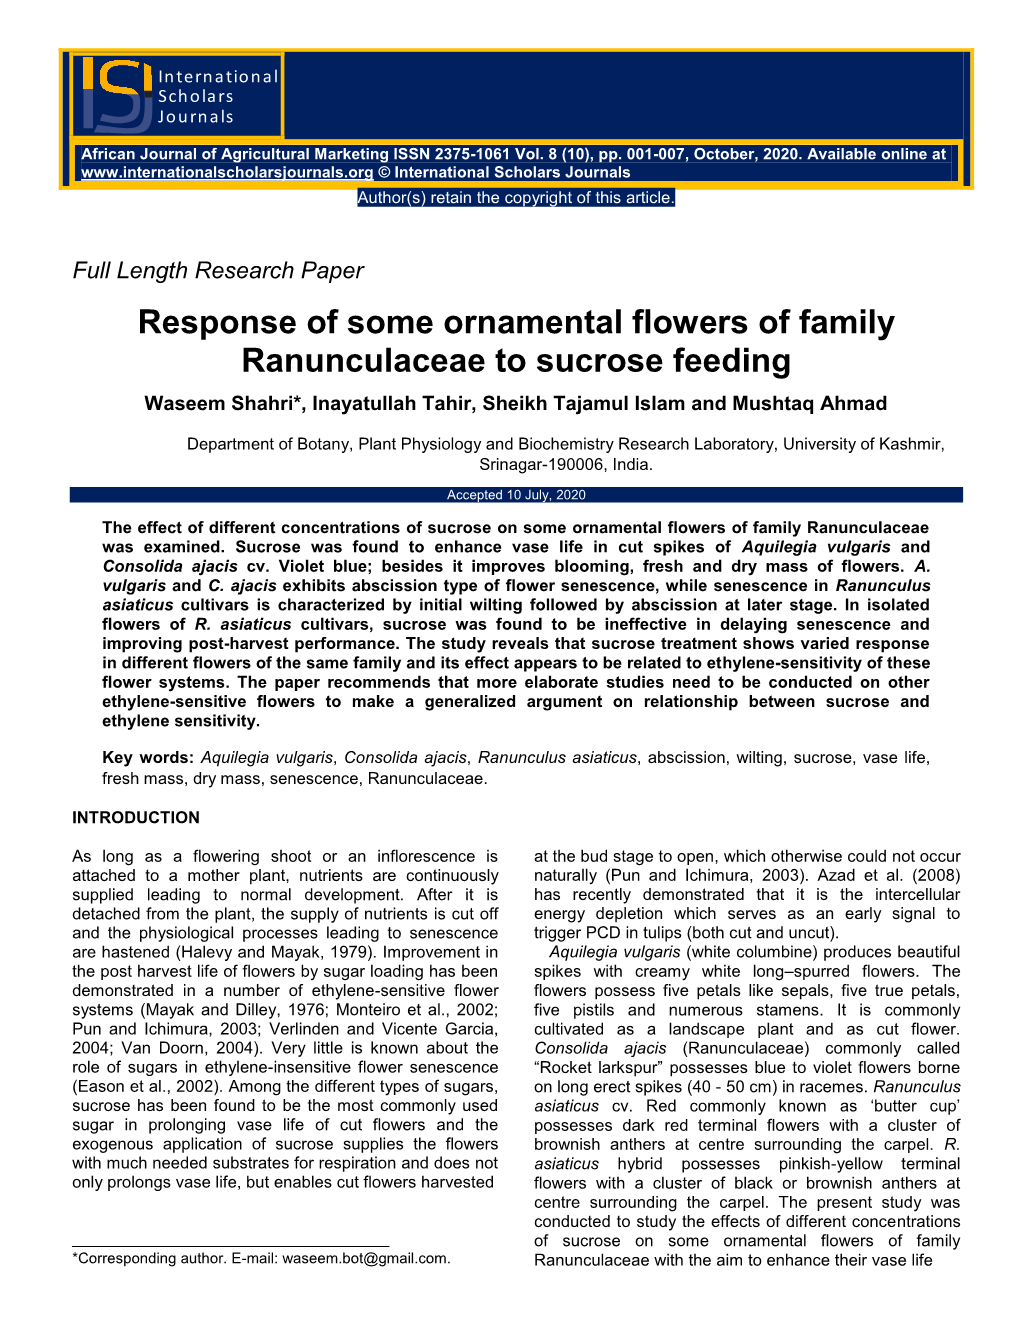 Response of Some Ornamental Flowers of Family Ranunculaceae to Sucrose Feeding